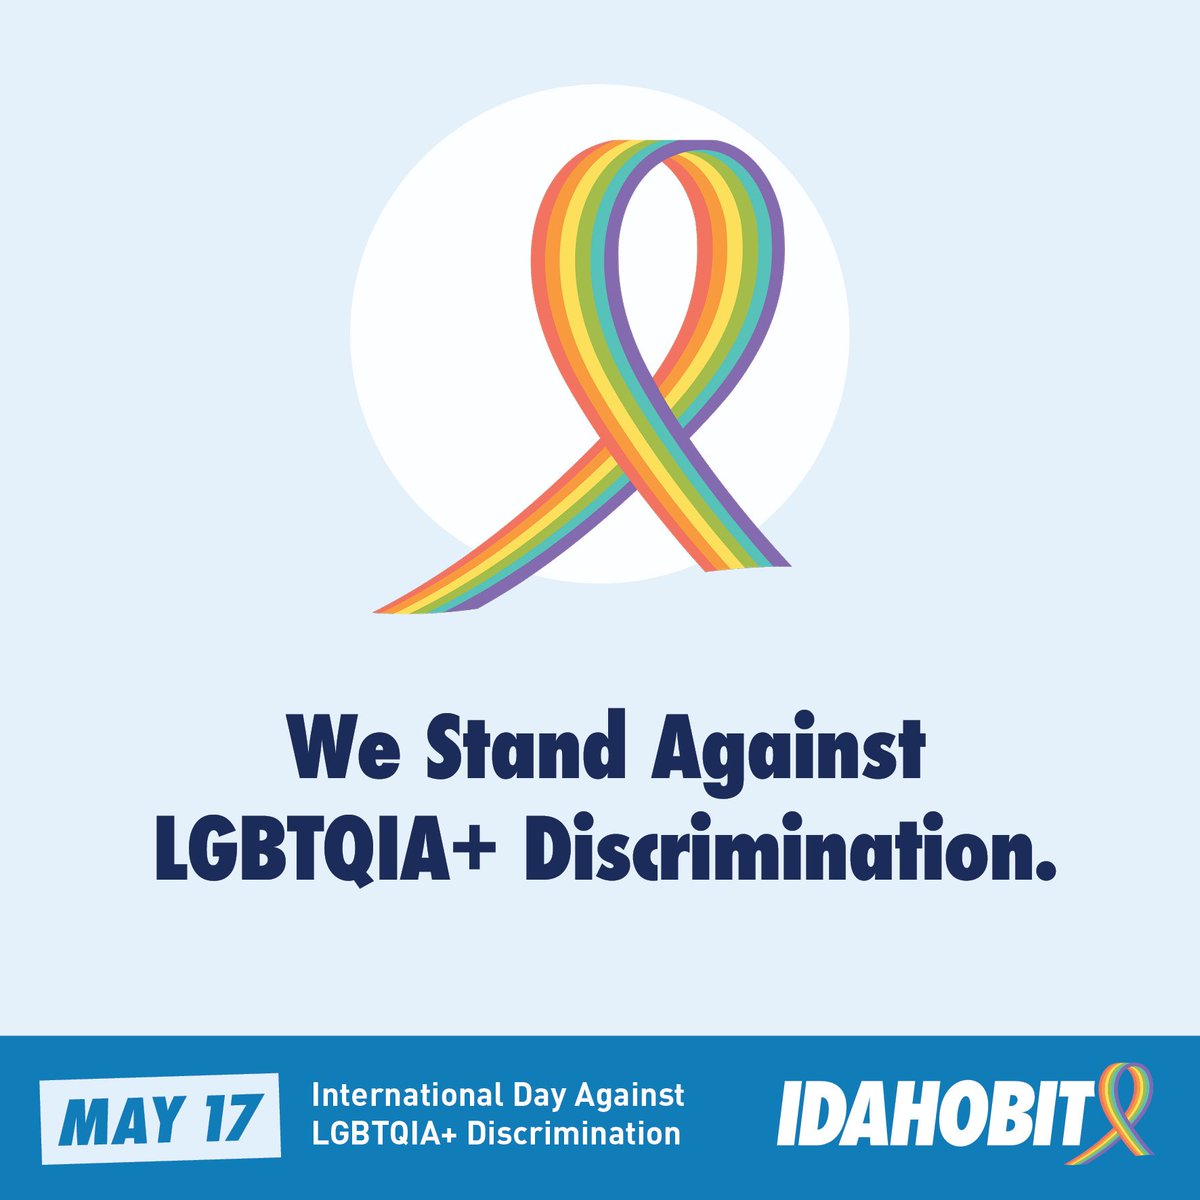 “No one left behind: equality, freedom and justice for all”. That’s the theme of this year’s #IDAHOBITDay and as a proud member of the LGBTIQA+ community, I firmly believe these values should be upheld today and every day! 🏳️‍🌈